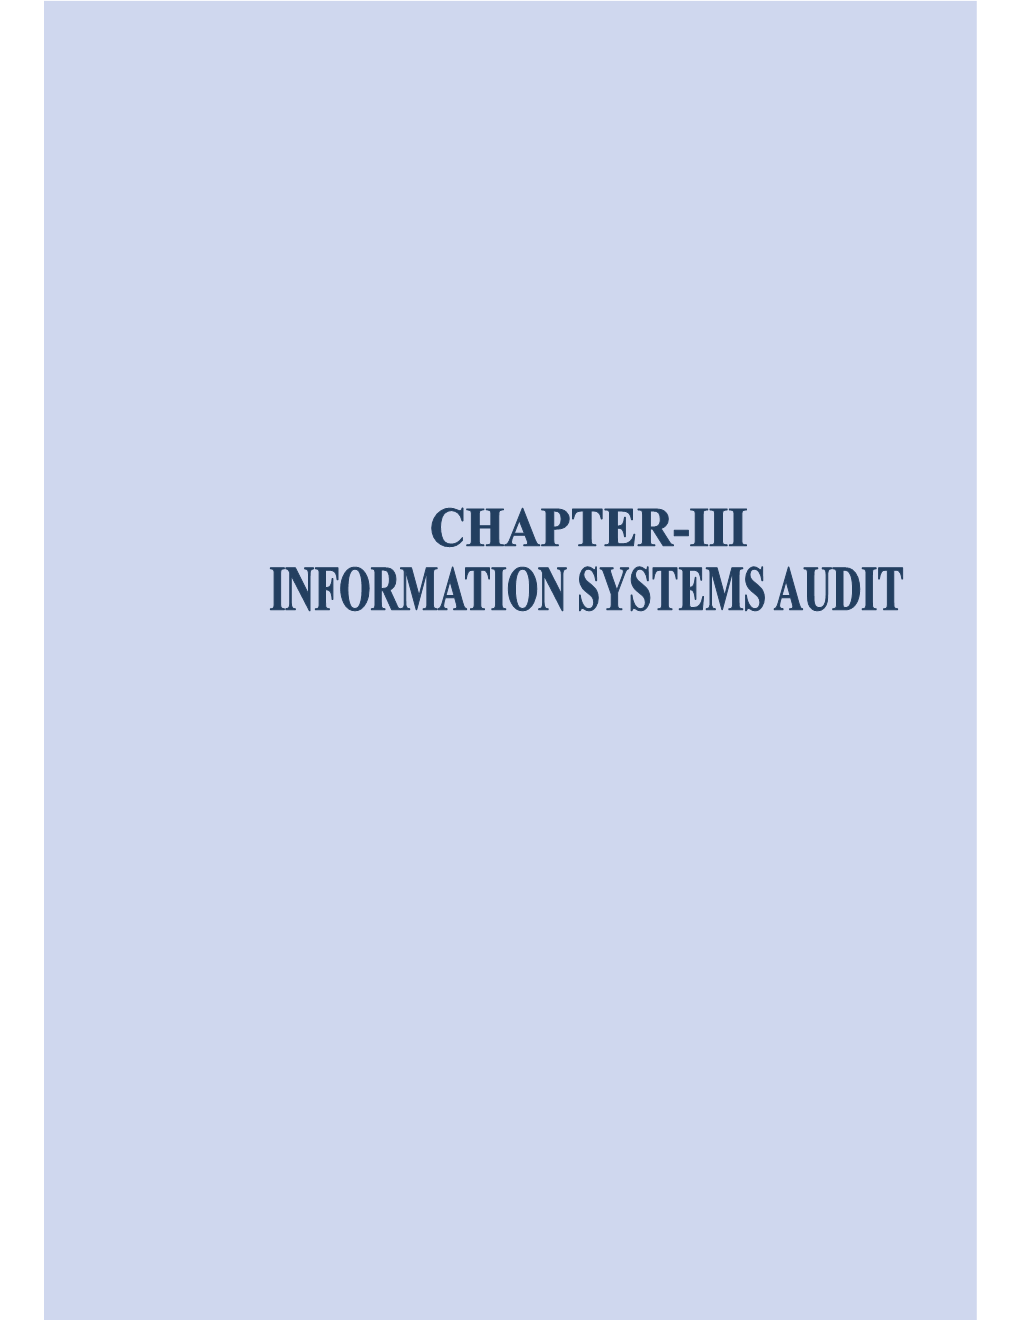 Information Systems Audit